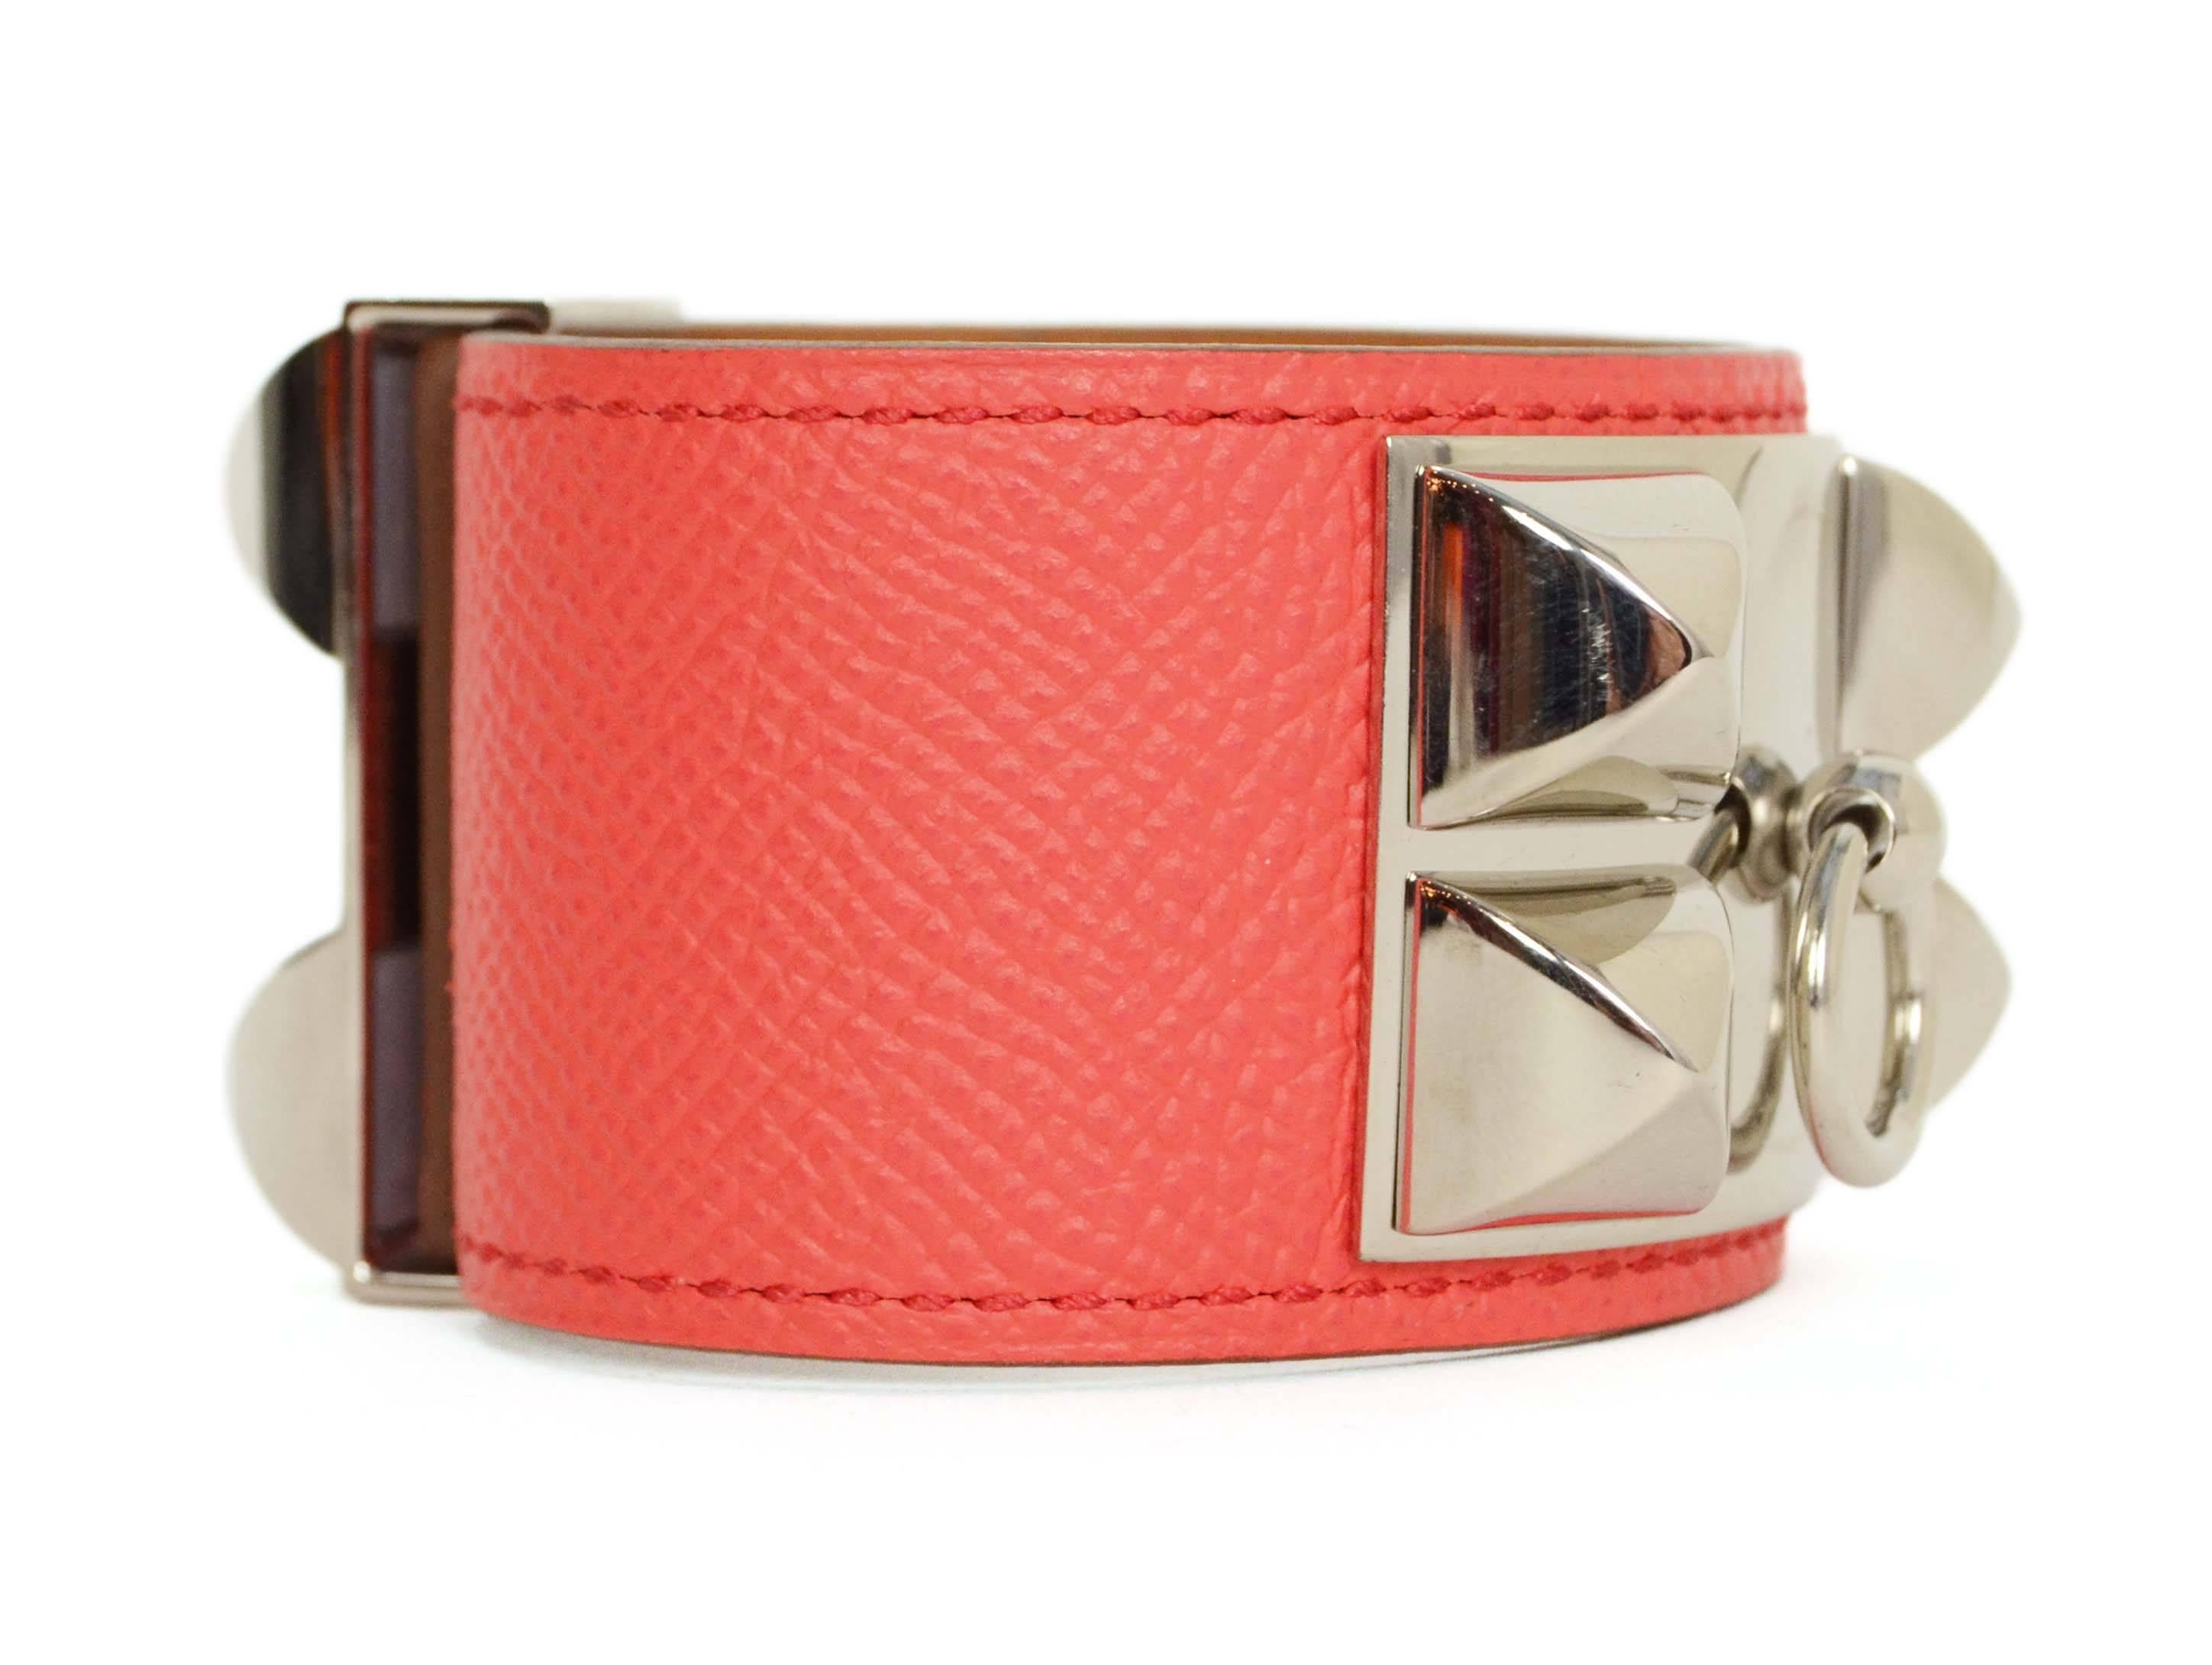 Hermes Jaipur Pink Leather CDC Cuff 
Made In: France
Year of Production: 2015
Color: Jaipur pink and silver
Hardware: Palladium
Materials: Leather and metal
Closure: Stud and notch closure with sliding bar
Stamp: T stamp
Overall Condition: